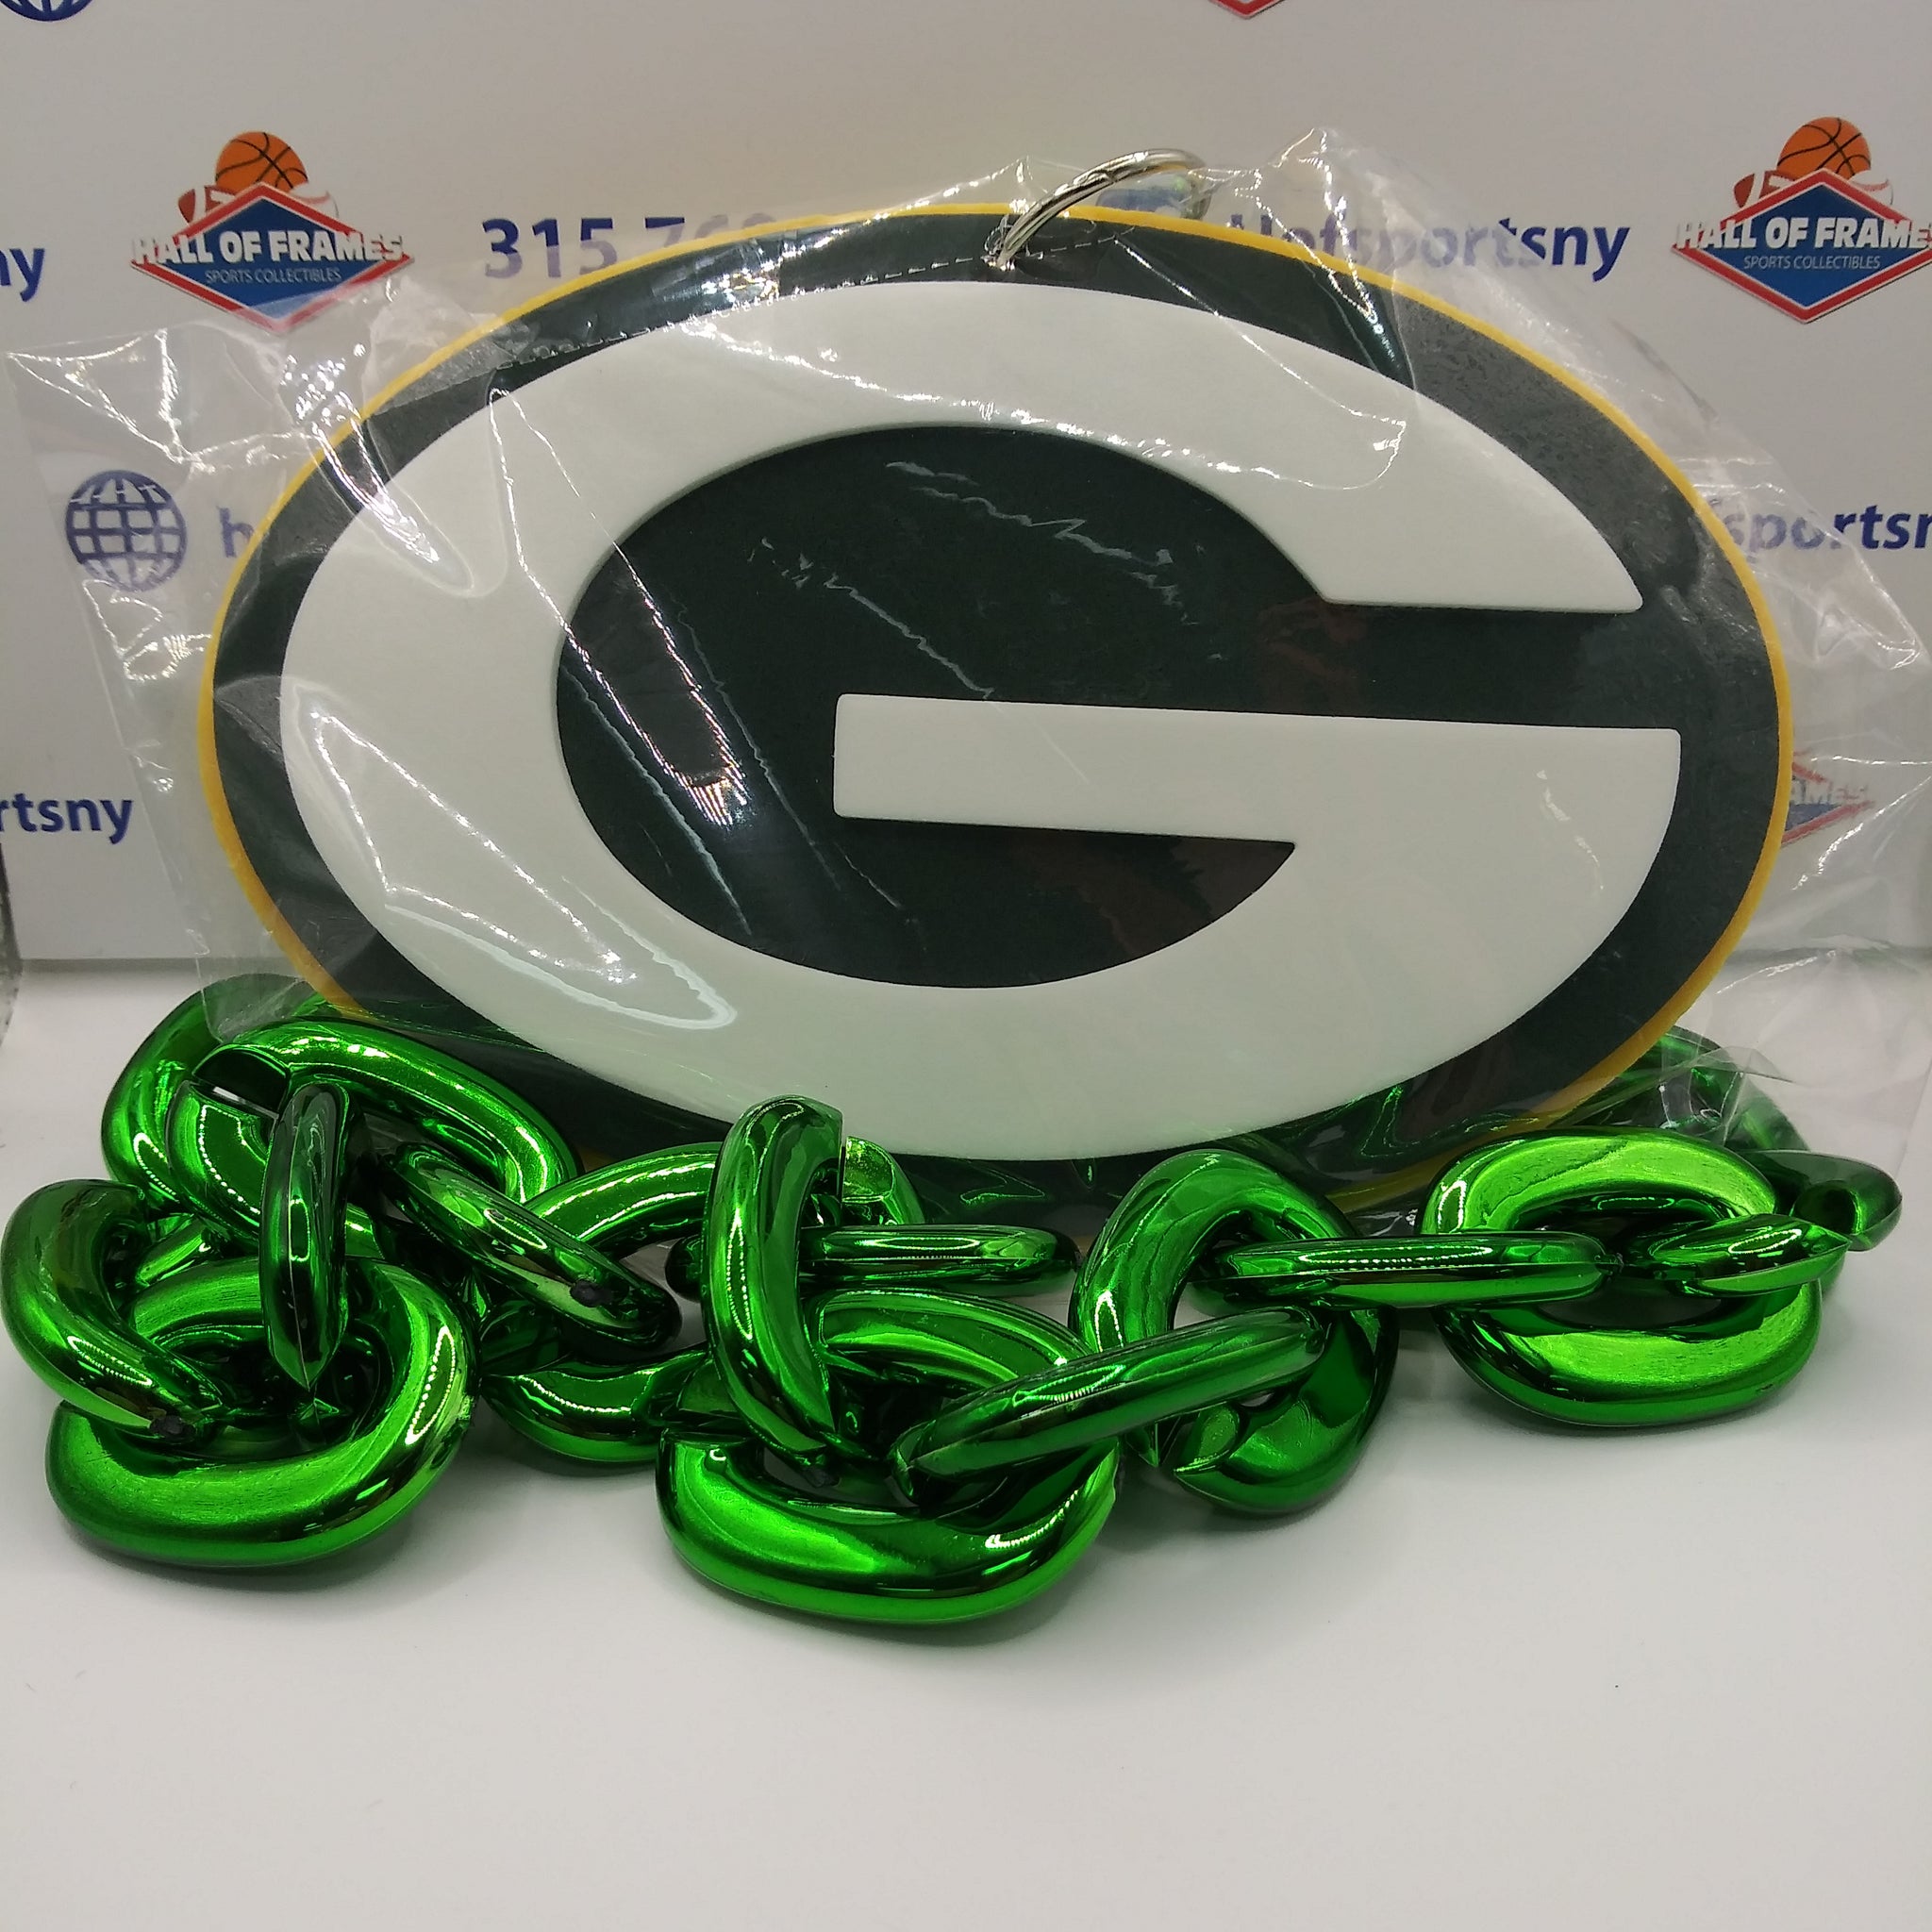 GREEN BAY PACKERS FANCHAIN BY FANFAVE!